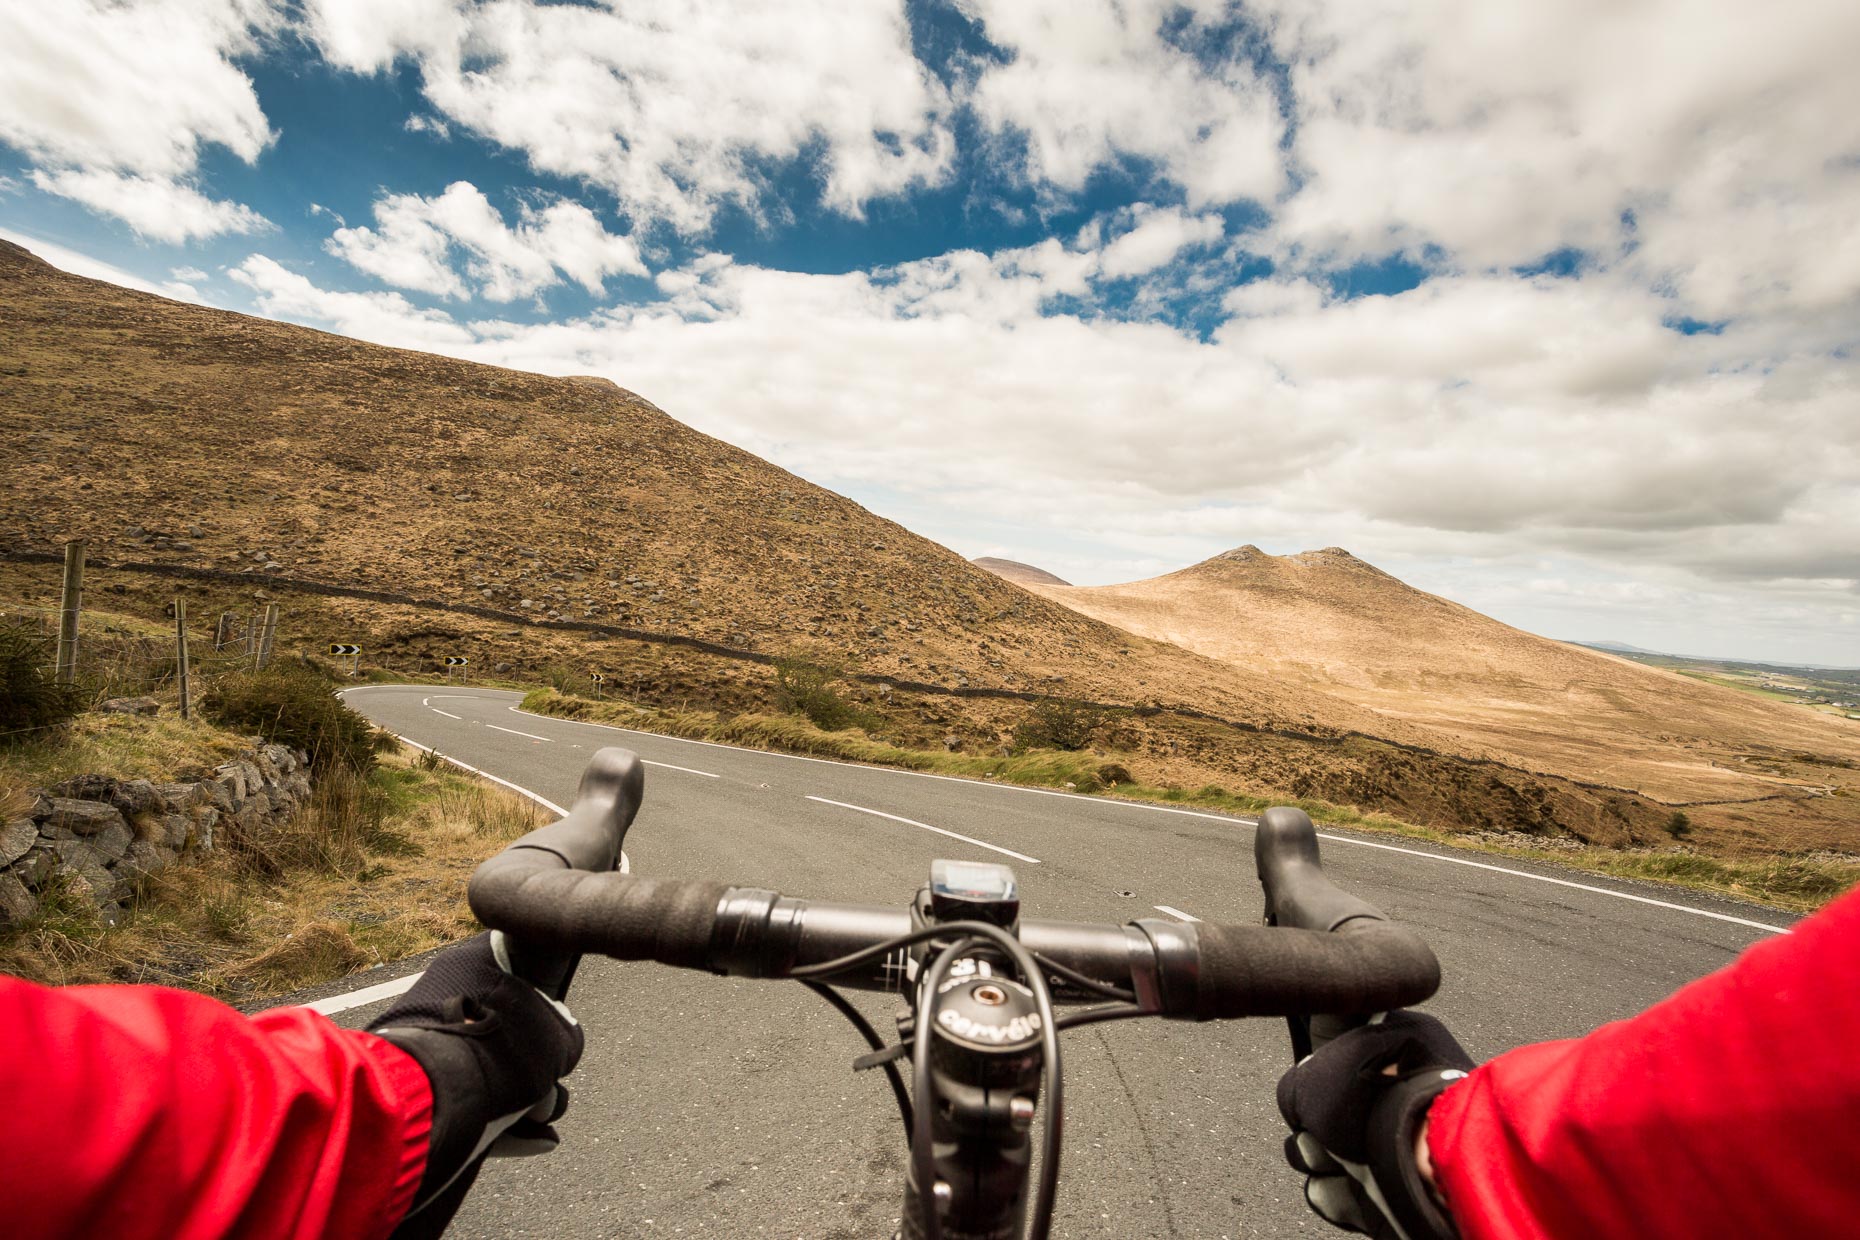 Racing around on a bicycle in the Mourne Mountains